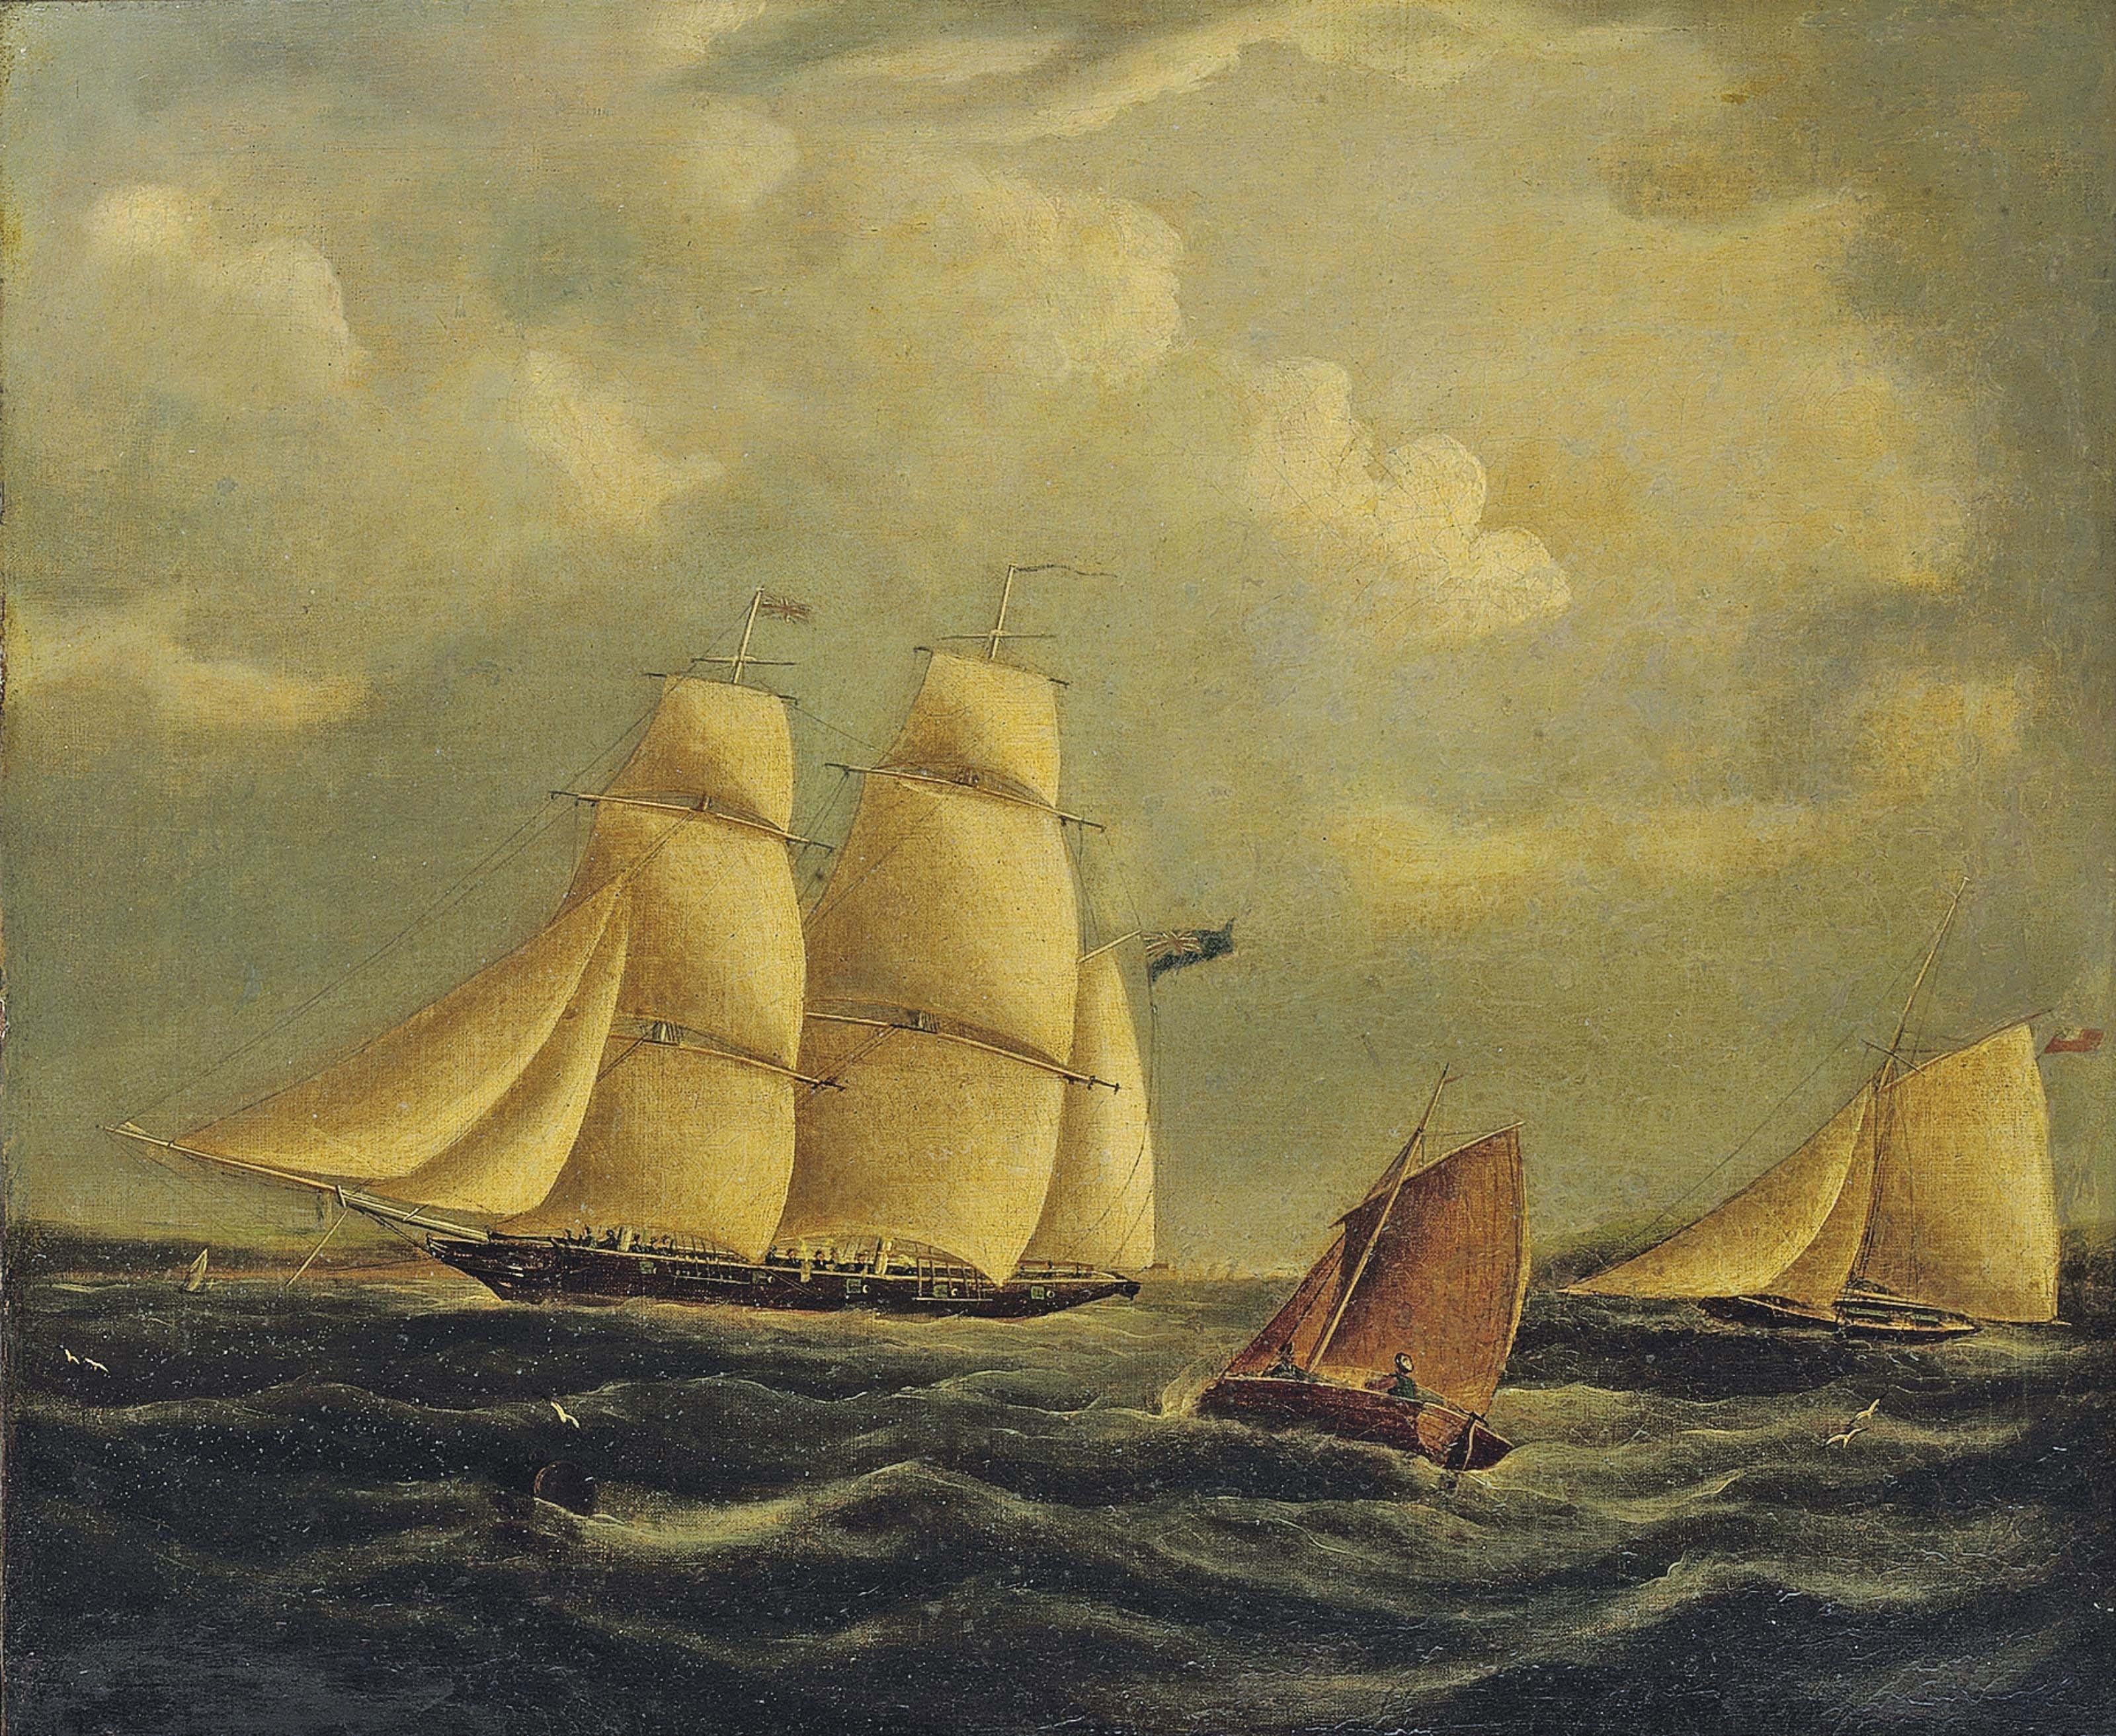 Follower of James Edward Buttersworth - An armed brig and cutter in the Channel